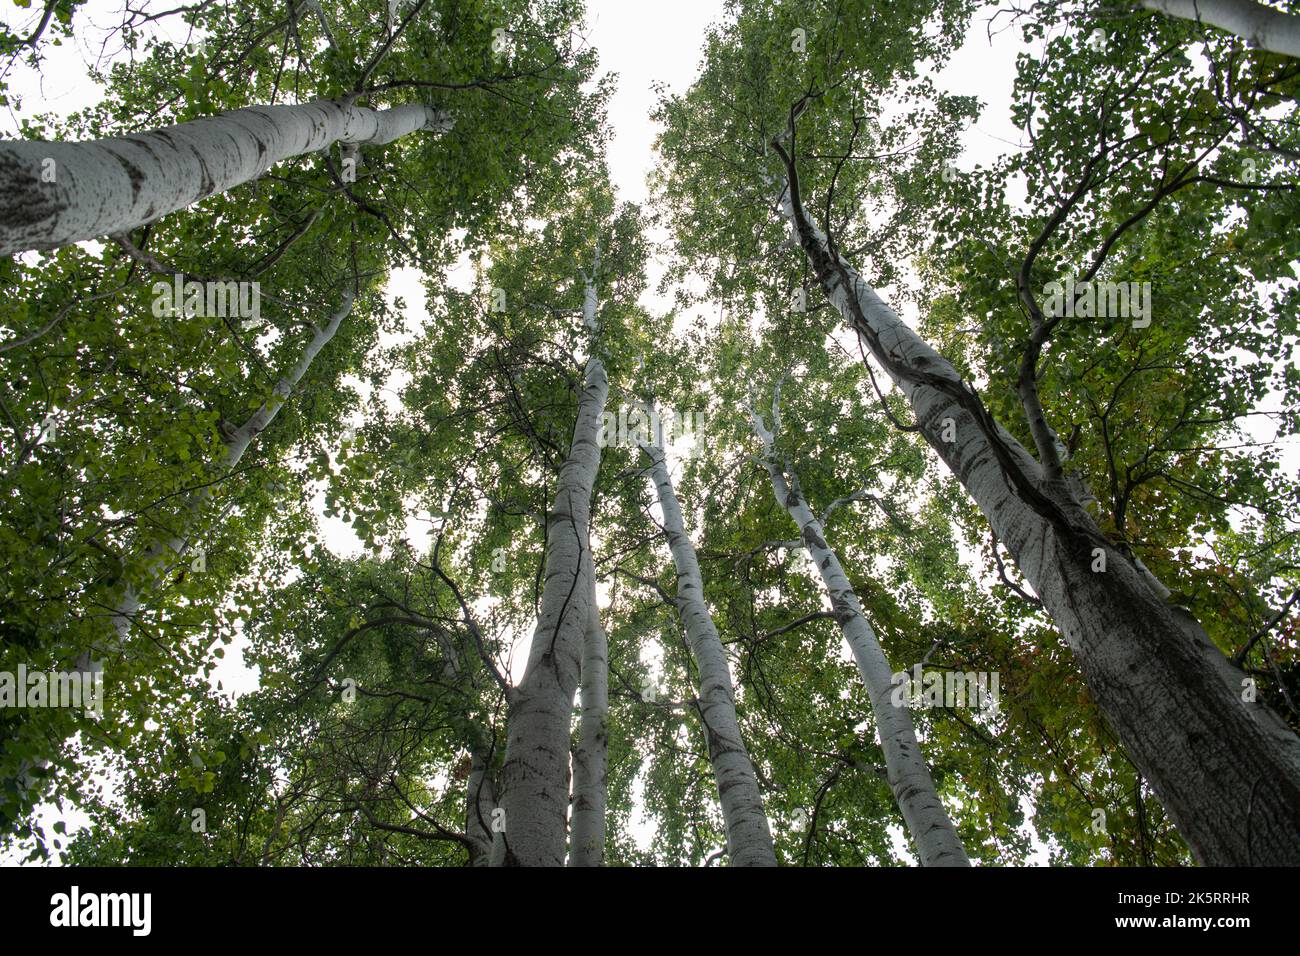 TALL TREES WITH GREEN LEAVES Stock Photo